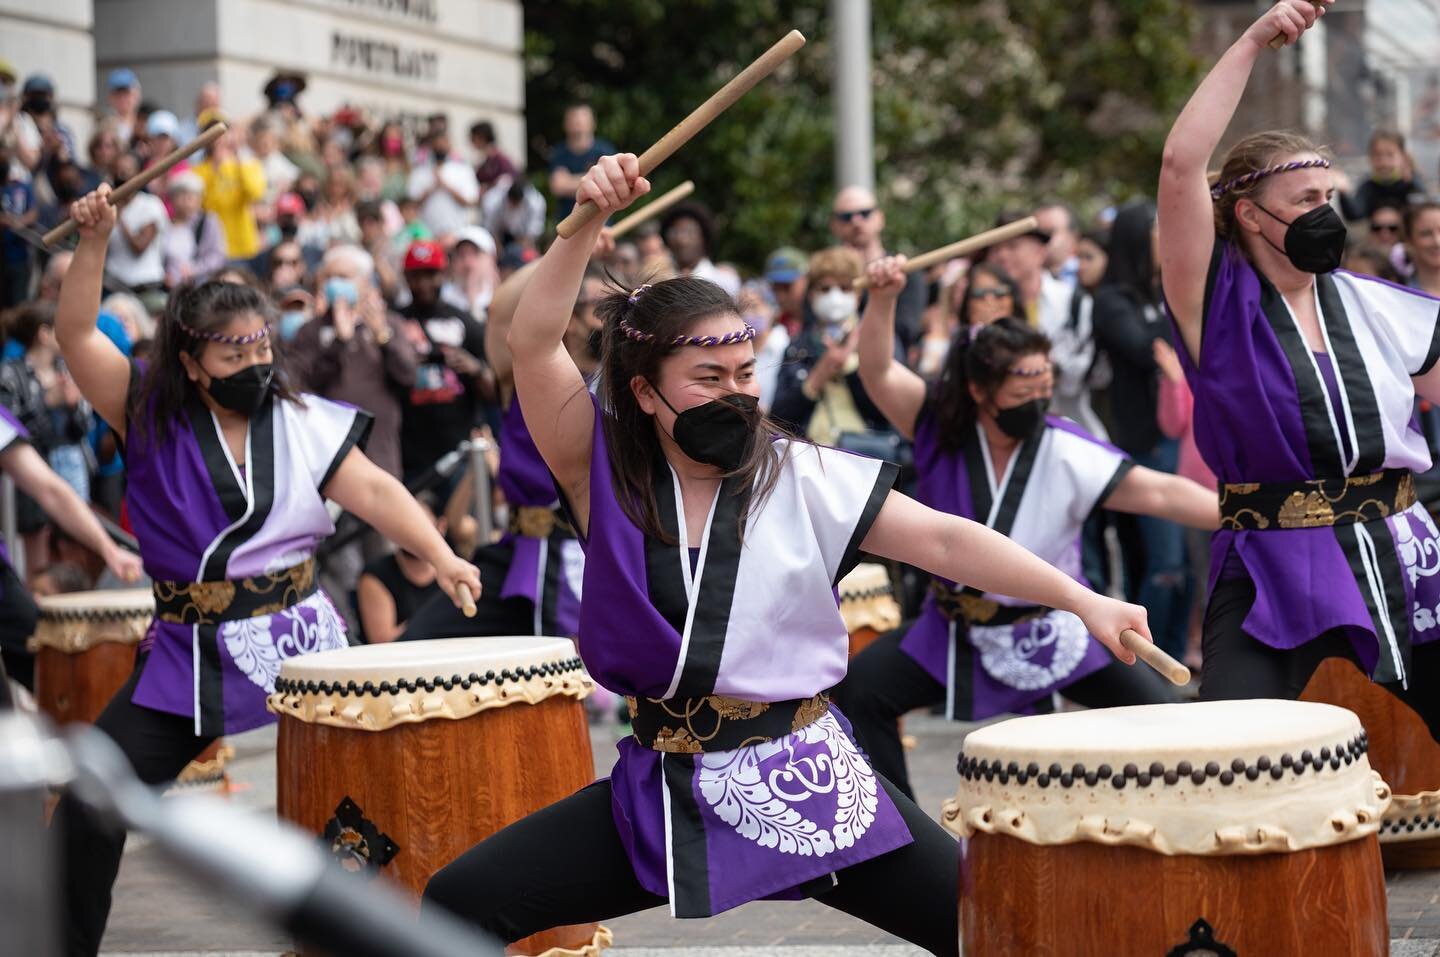 Let&rsquo;s keep with the theme of looking back to last year with these photos from the Cherry Blossom Festival celebration at SAAM (the Smithsonian @americanart Museum). In 2022, it was an outdoor event with a huge crowd and an impressive amount of 